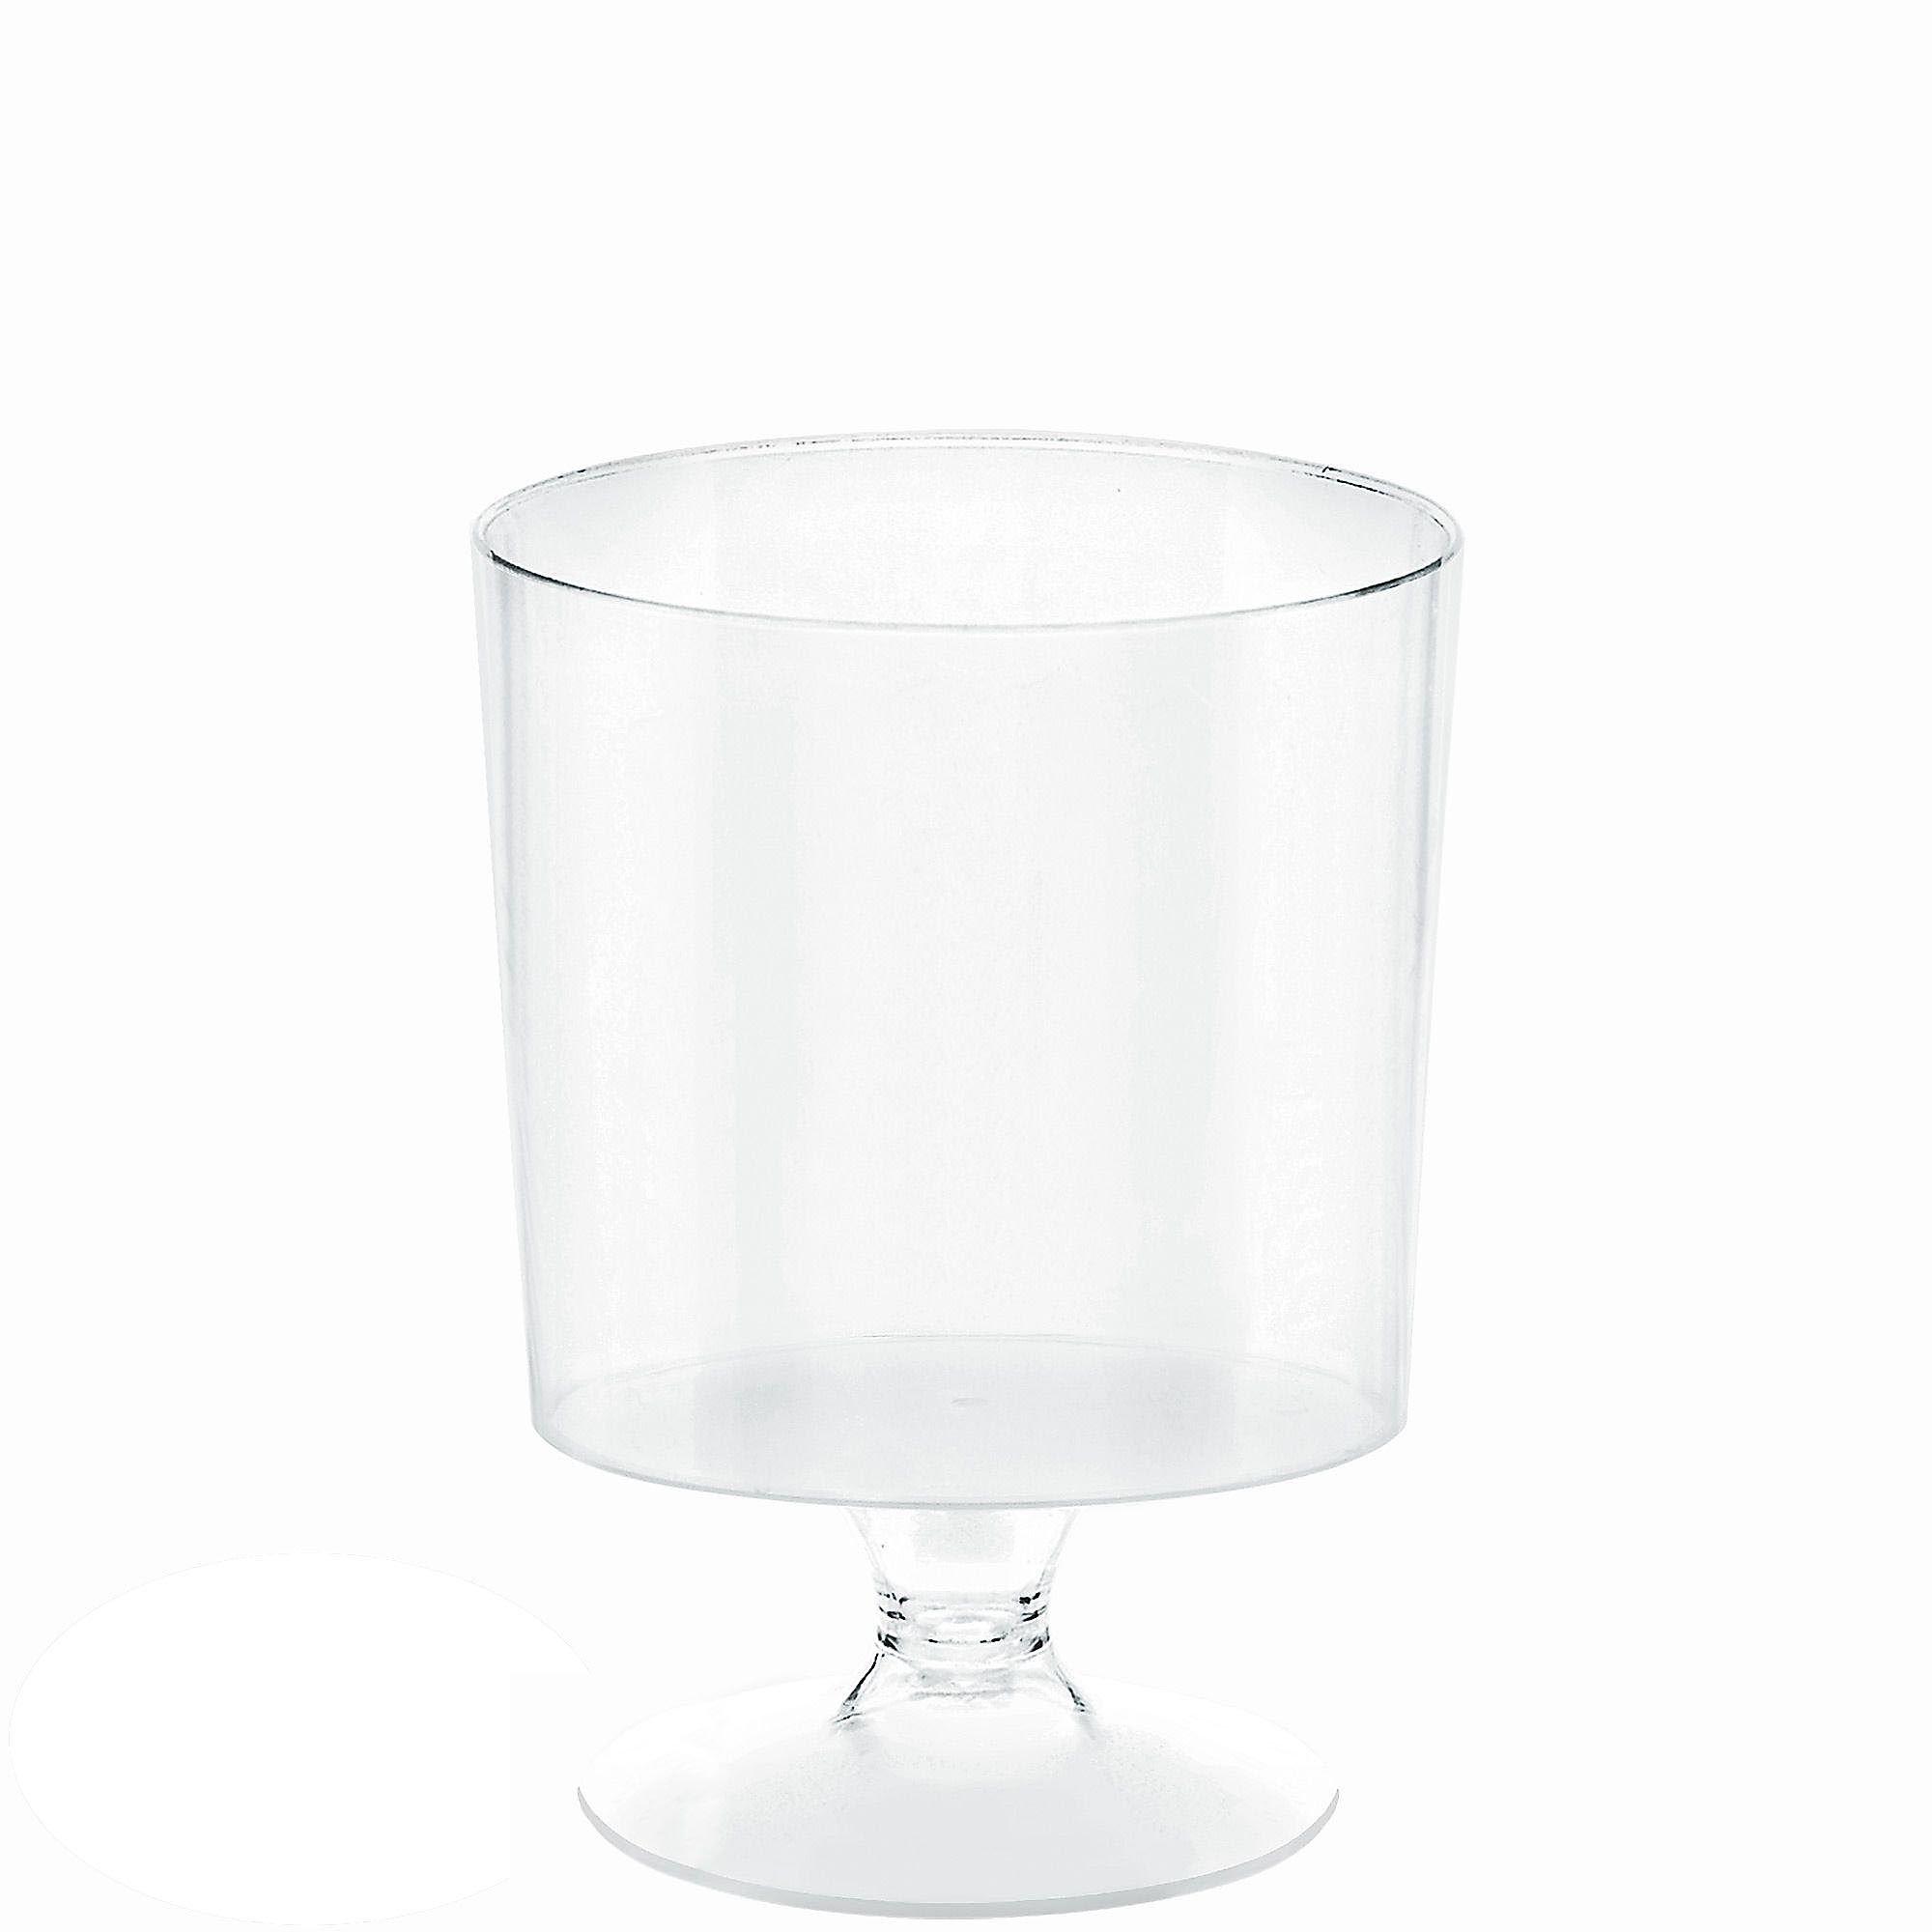 Cocktail Party Cups – Paddle Tramps